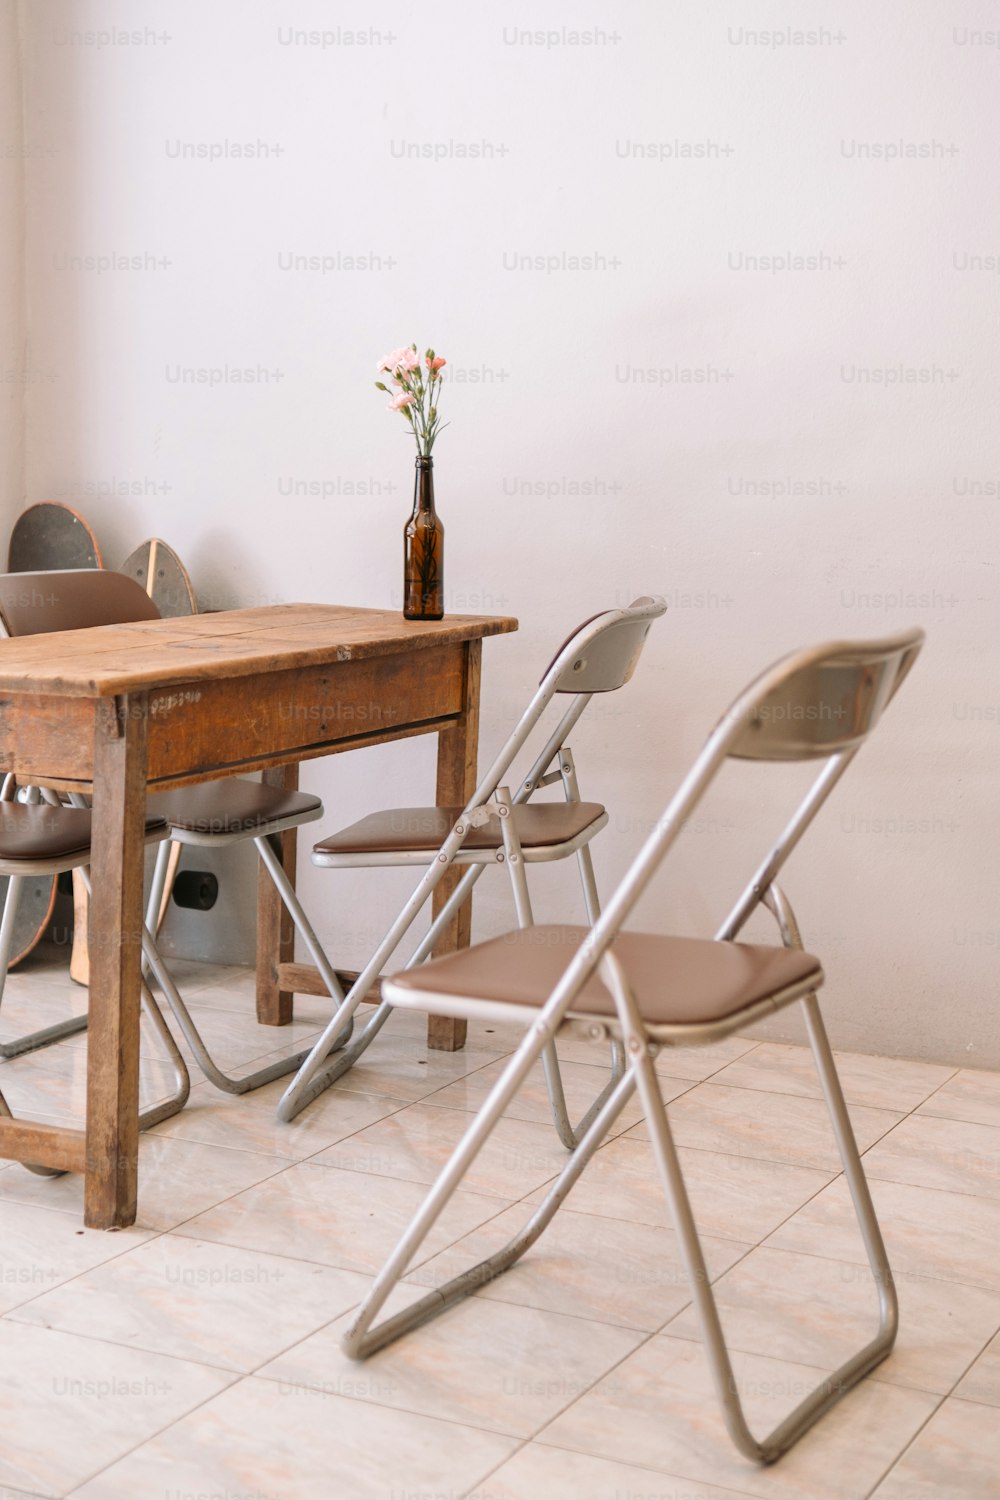 a wooden table with four chairs around it